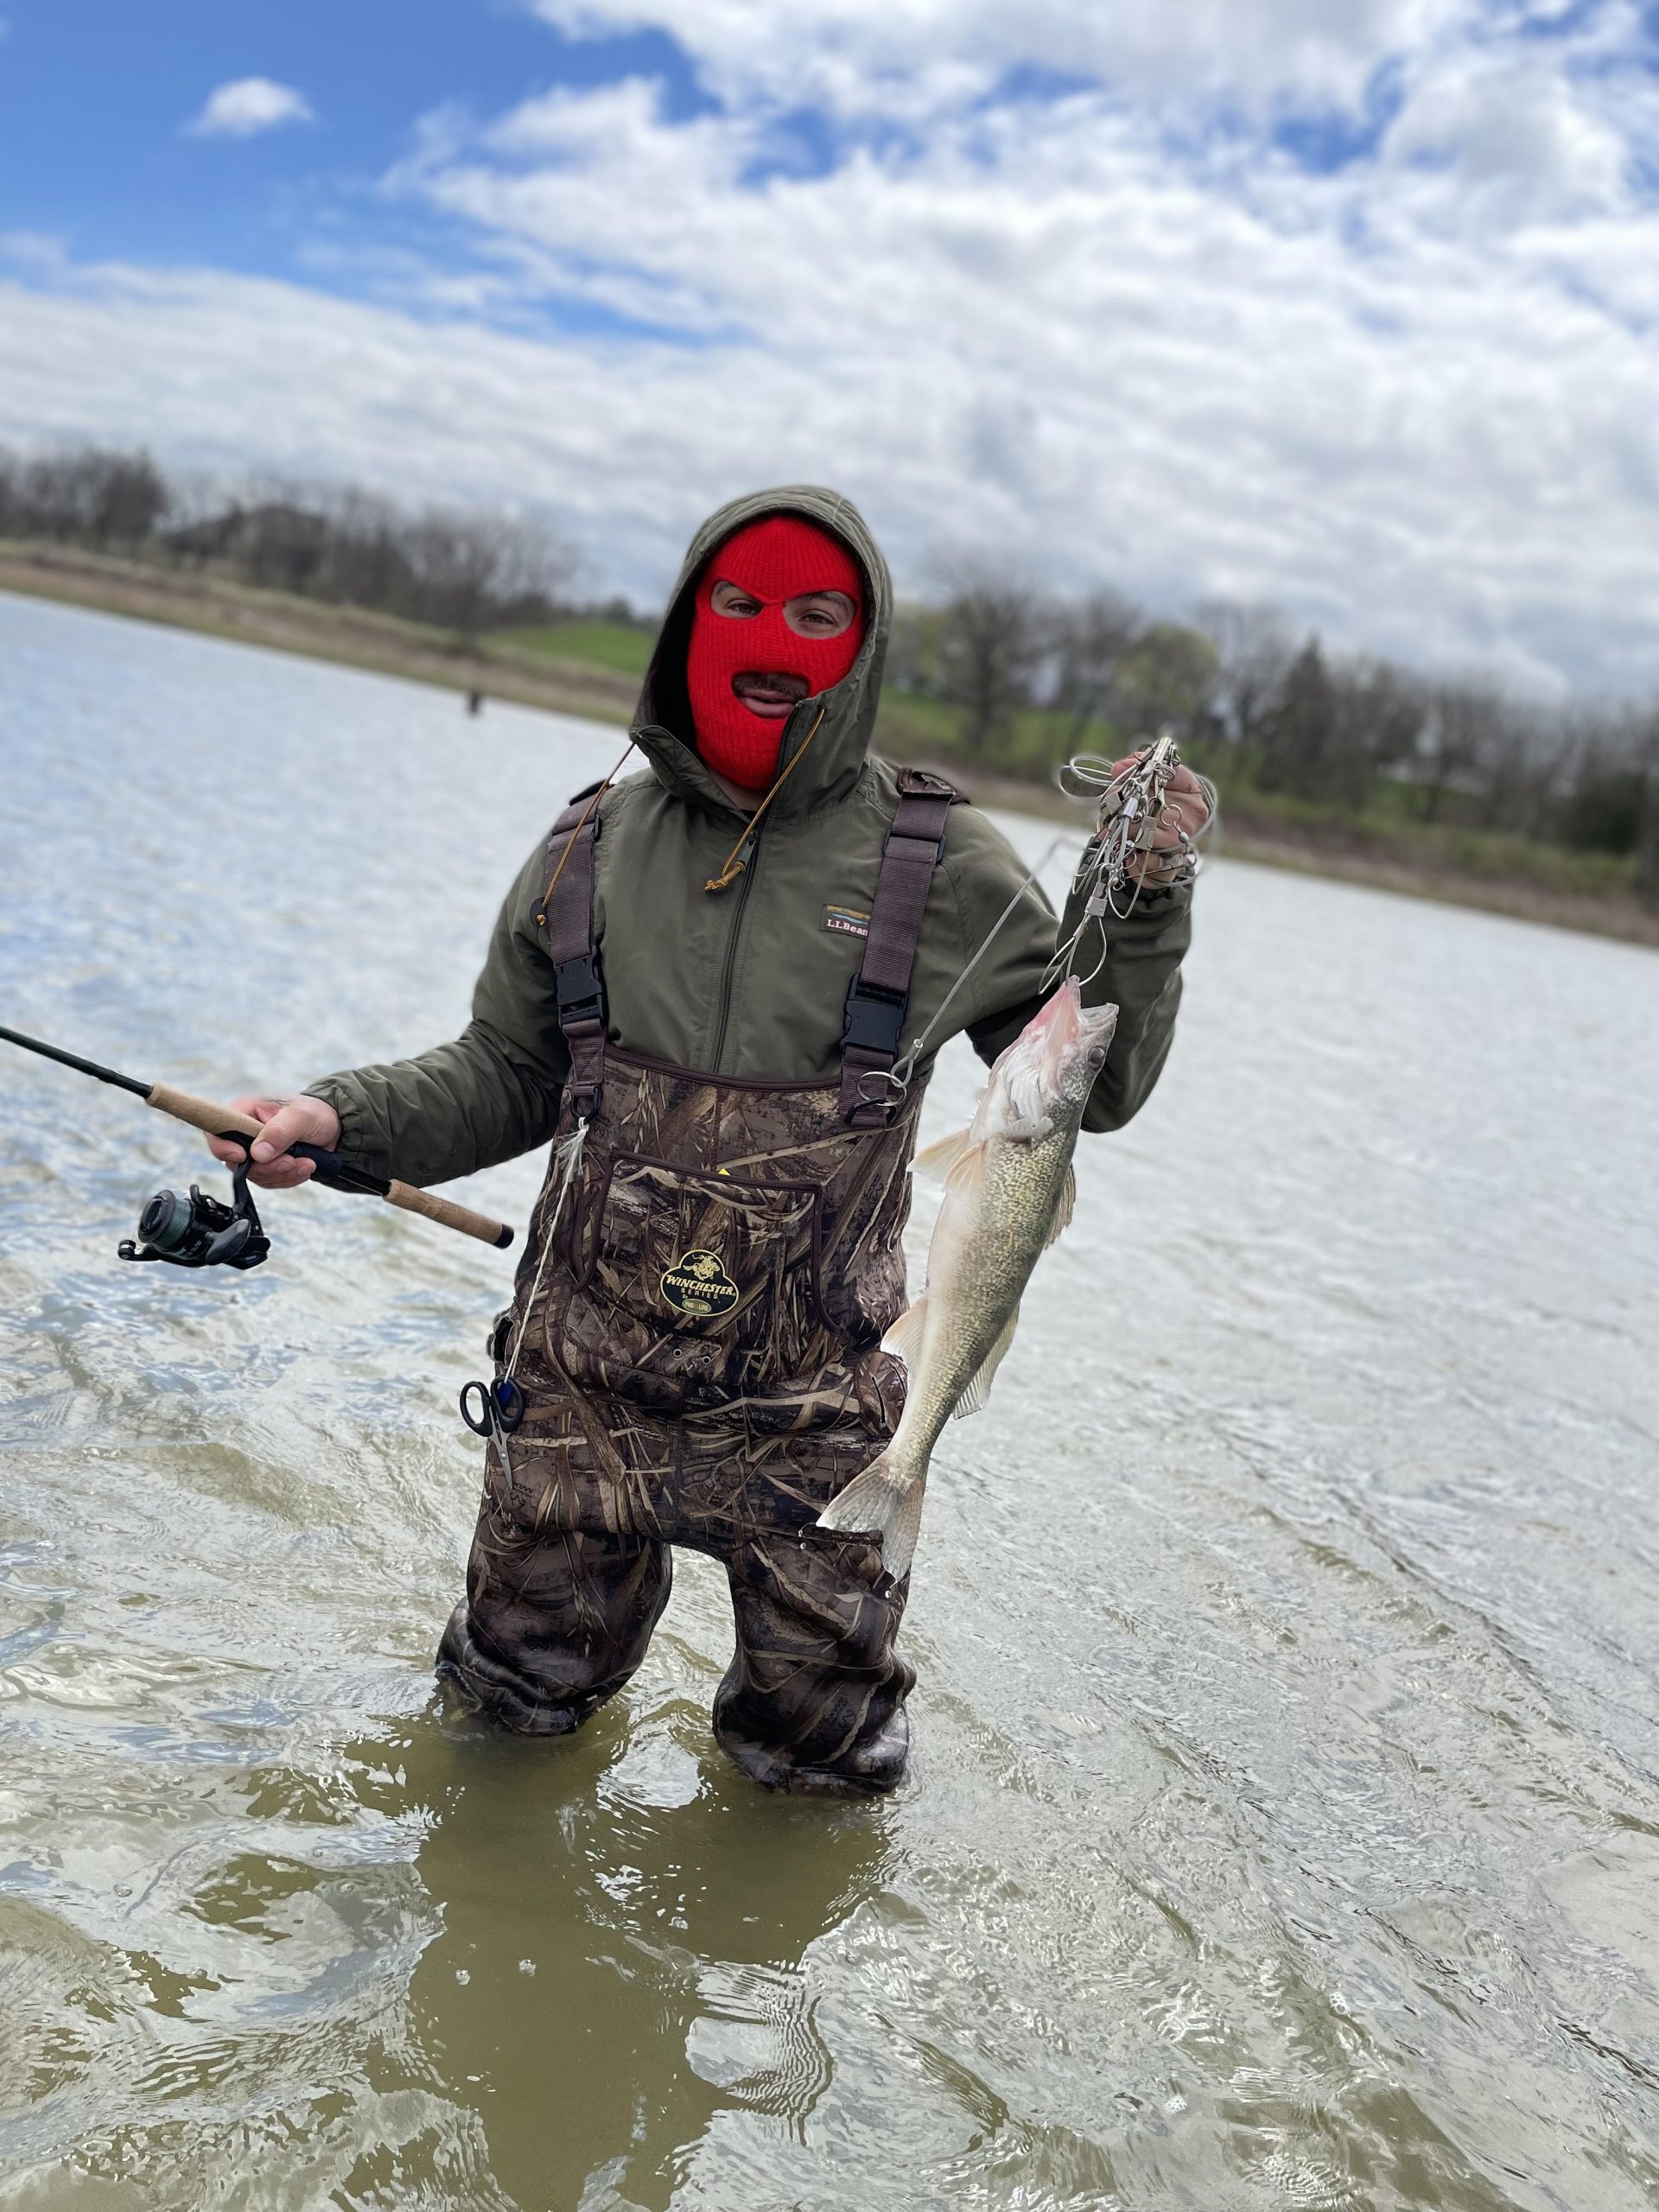 Maumee river report- april 22, 2022